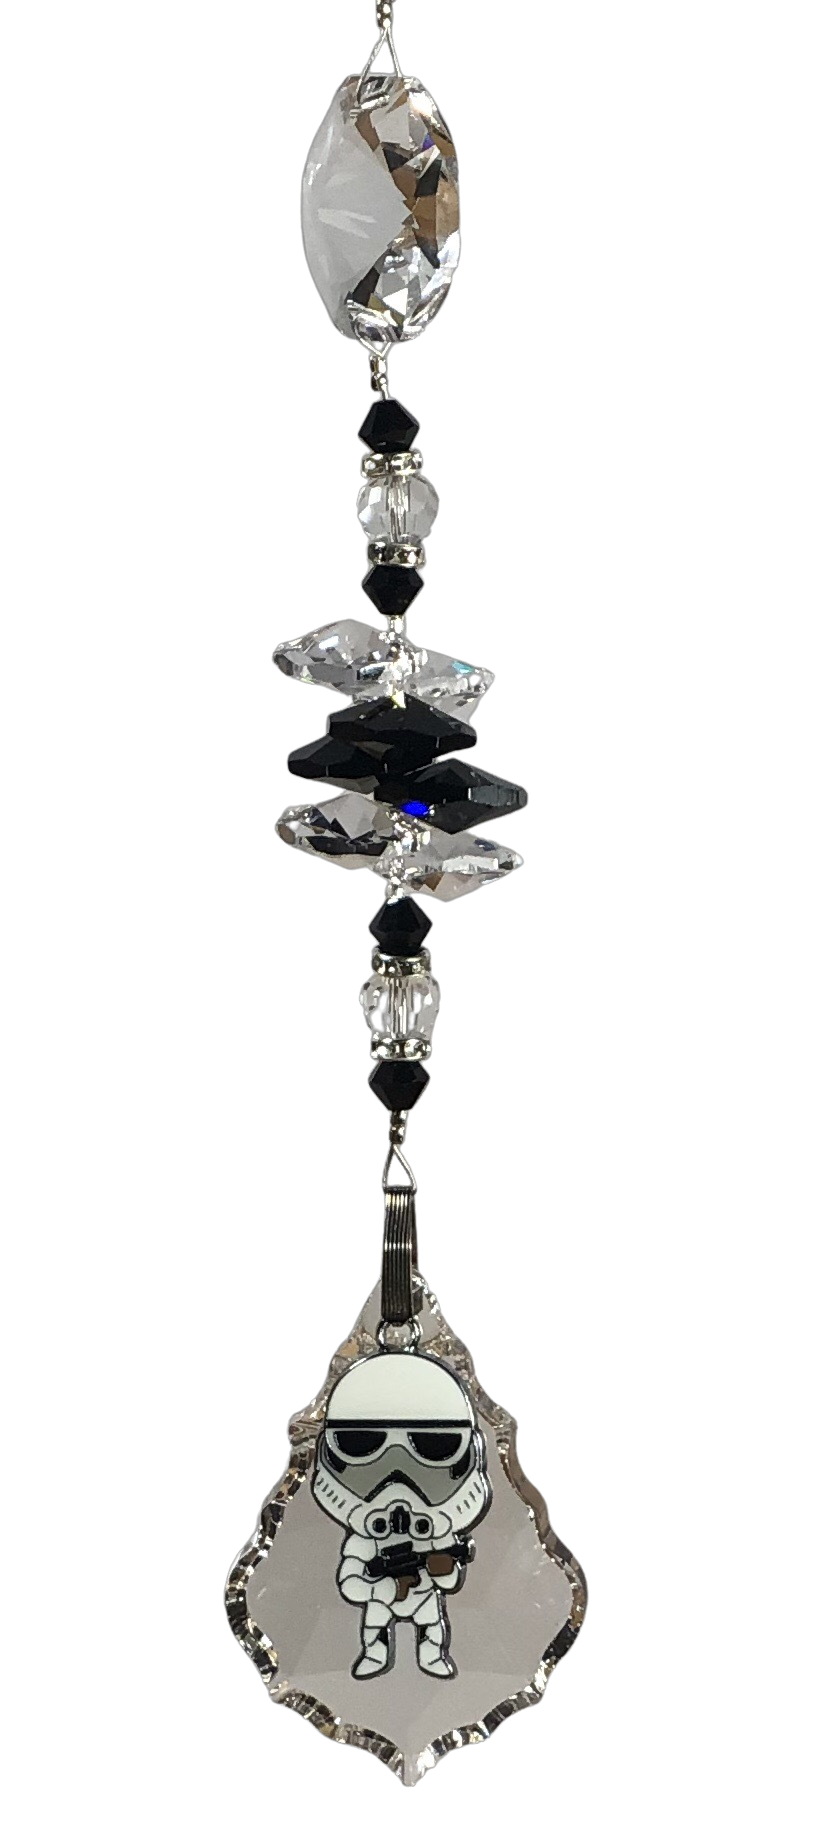 Star Wars - Stormtrooper crystal suncatcher, decorated with 50mm Starburst crystal and snowflake obsidian gemstone.